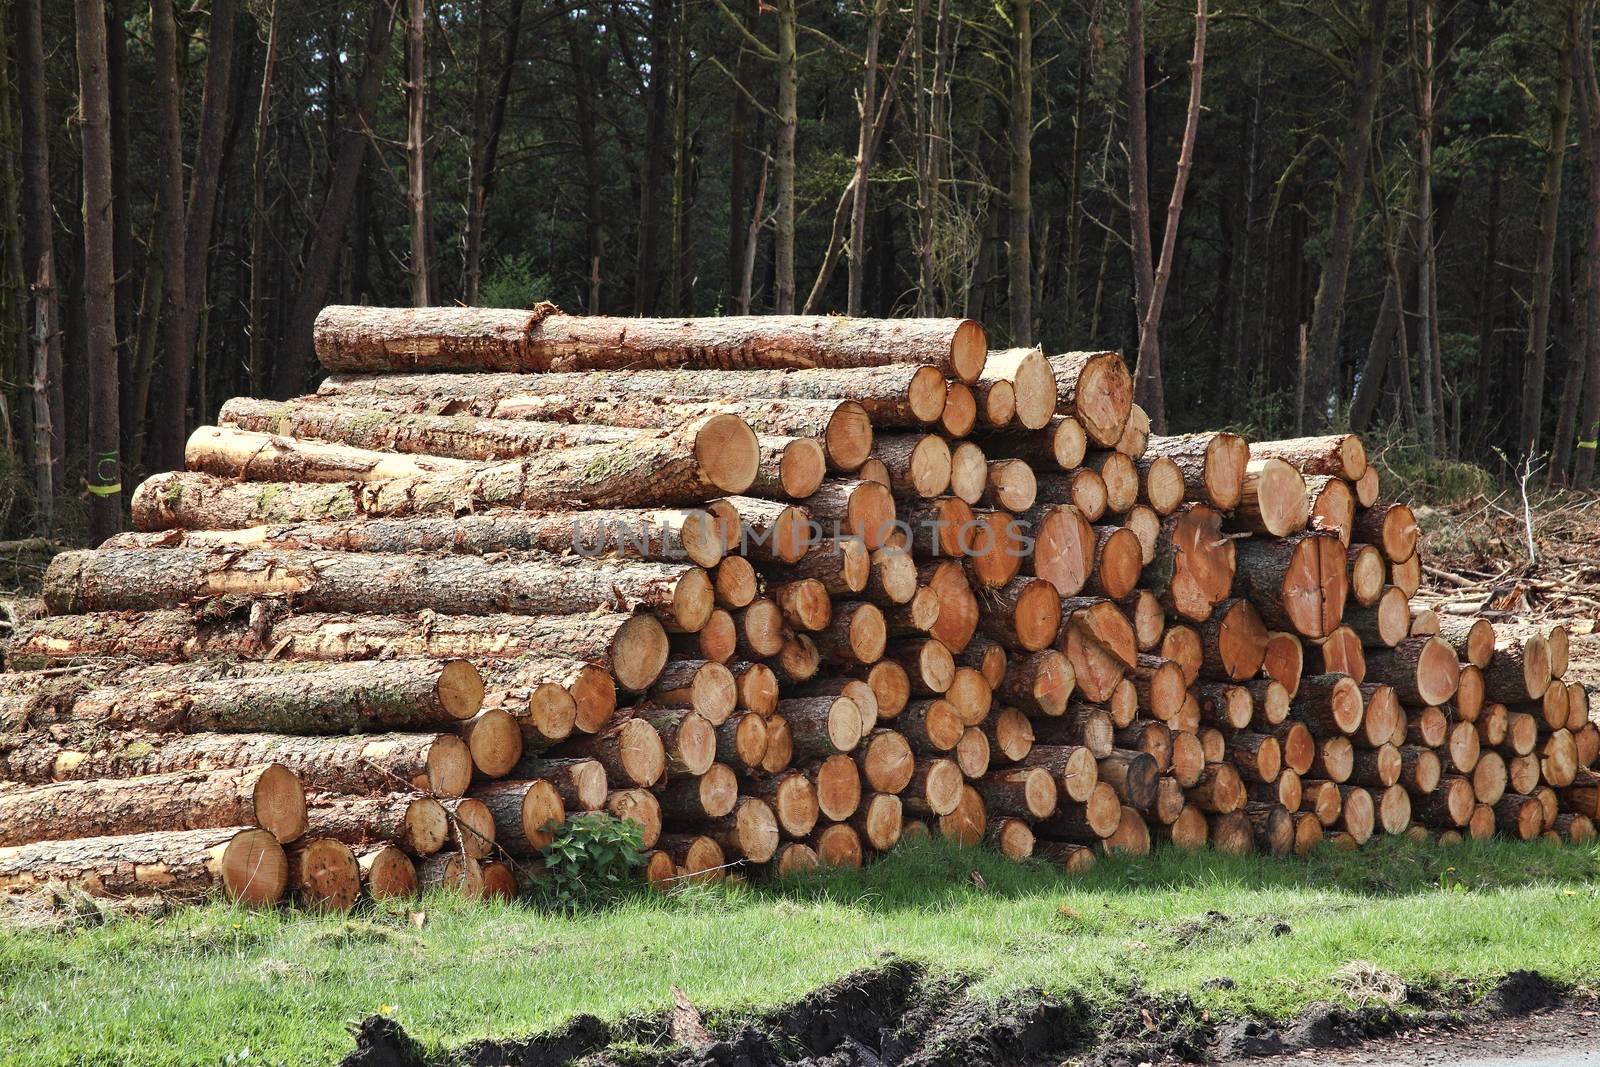 Forest pine trees log trunks felled by the logging timber industry which may have an environment conservation impact stock photo